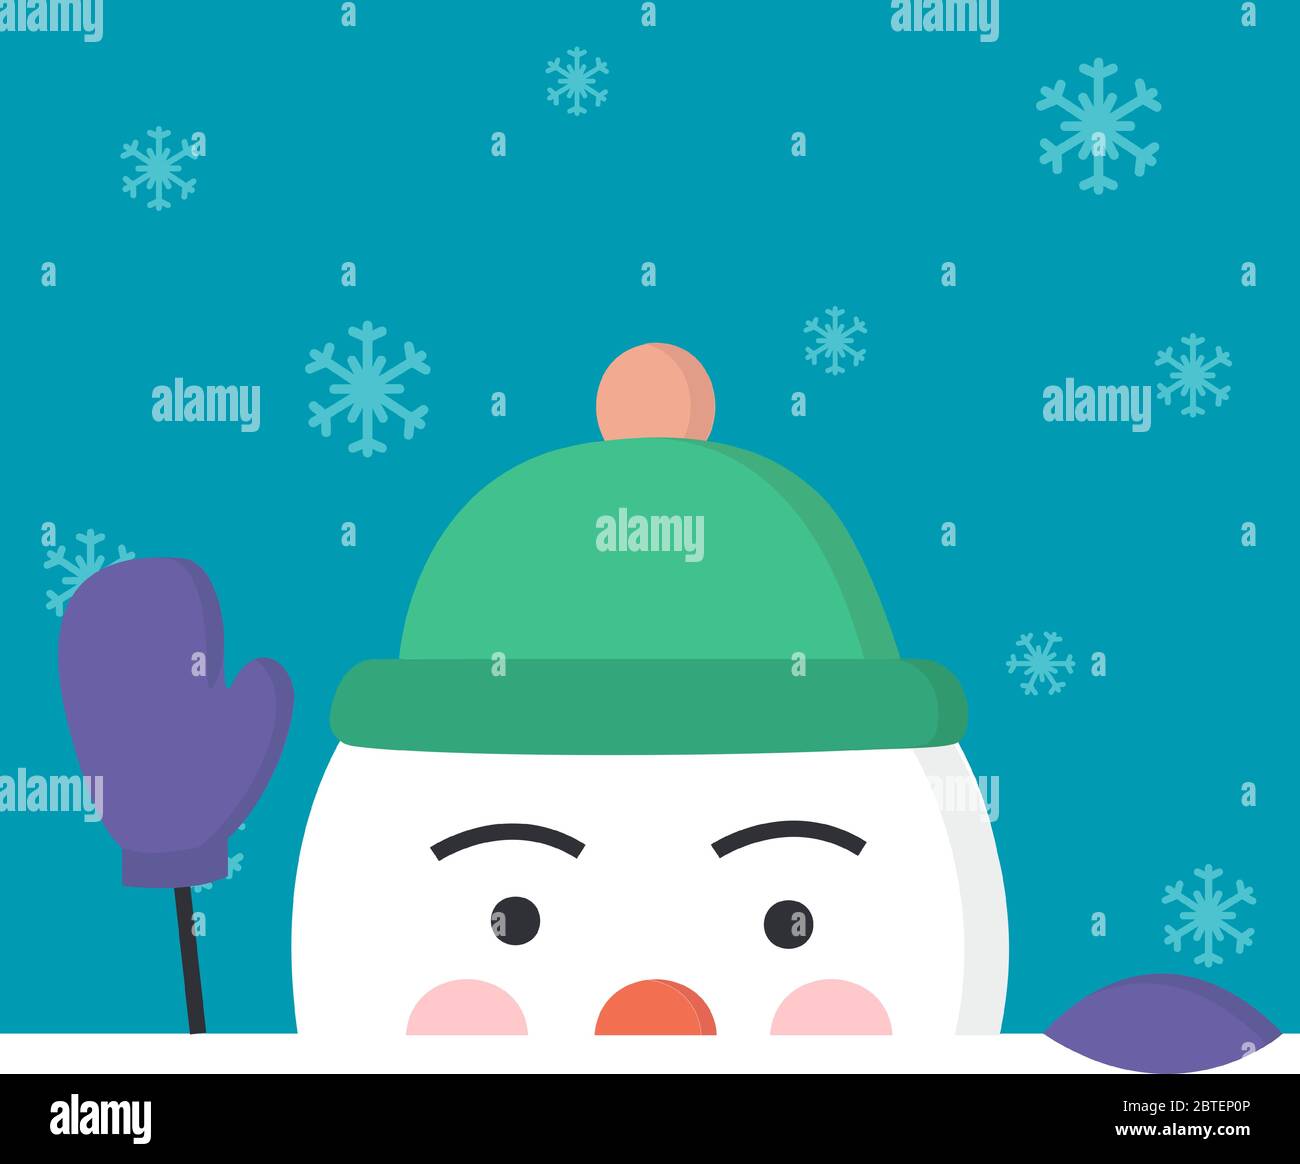 Concept christmas and winter. Half head of snowman welcomes with a hand in a mitten. Snowflakes fly on the blue background Stock Vector